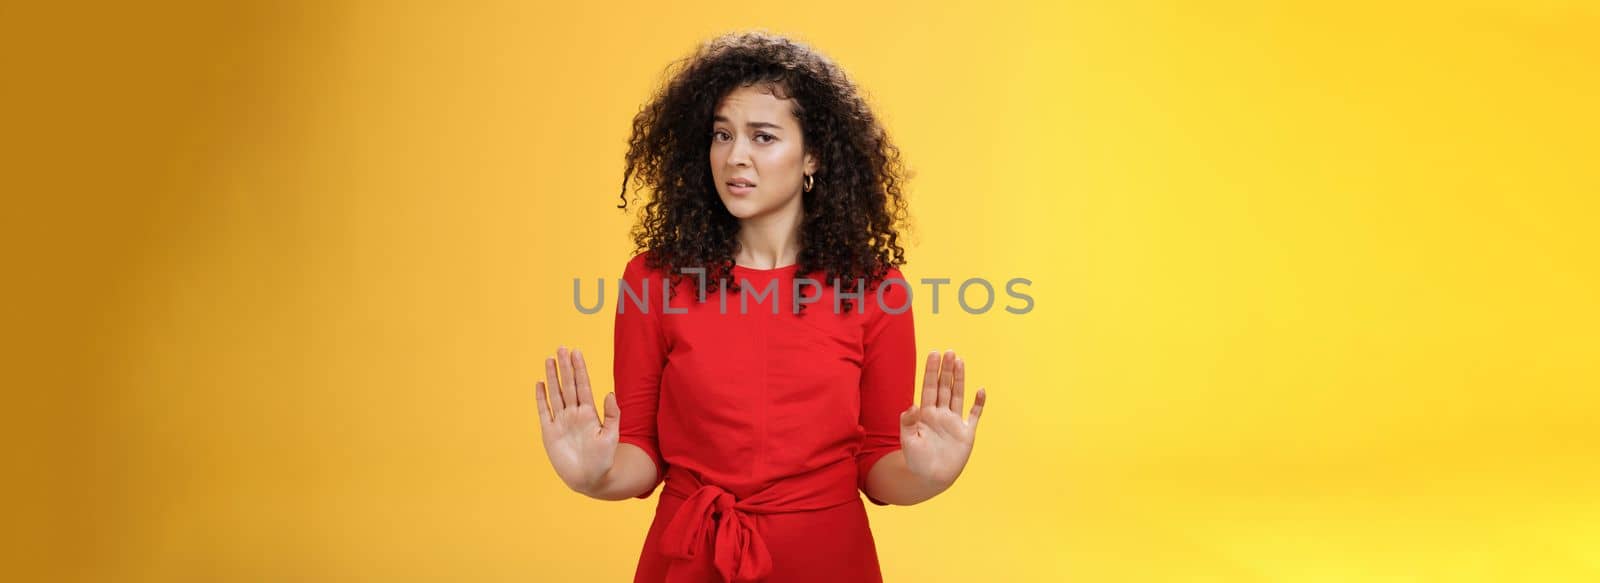 Lifestyle. Girl unwiling got in troubles rejecting suspicious and doubtful offer pulling raised palms in no and refusal gesture turning head with grimace from aversion and disgust looking with contempt at camera.